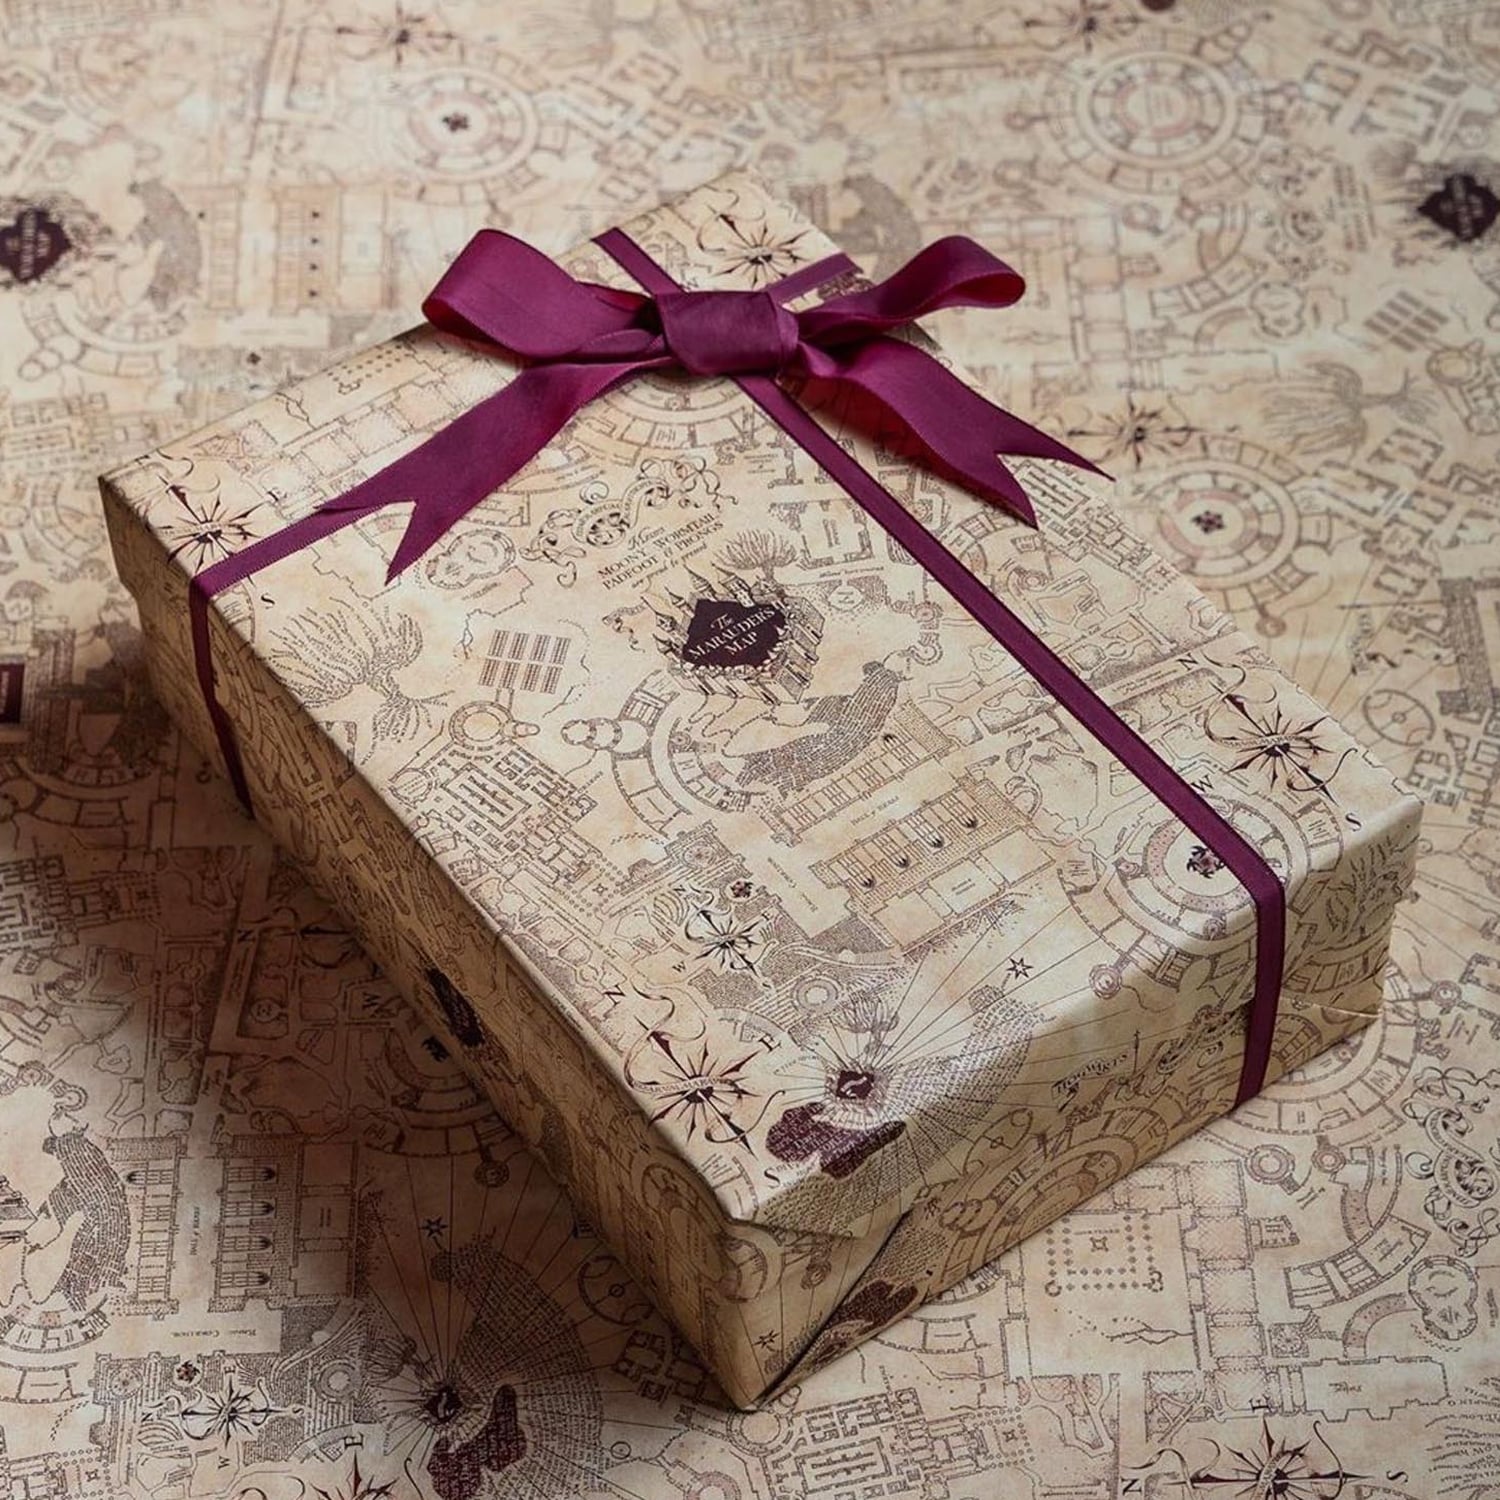 Harry Potter Christmas Wrapping Paper From Mina Lima